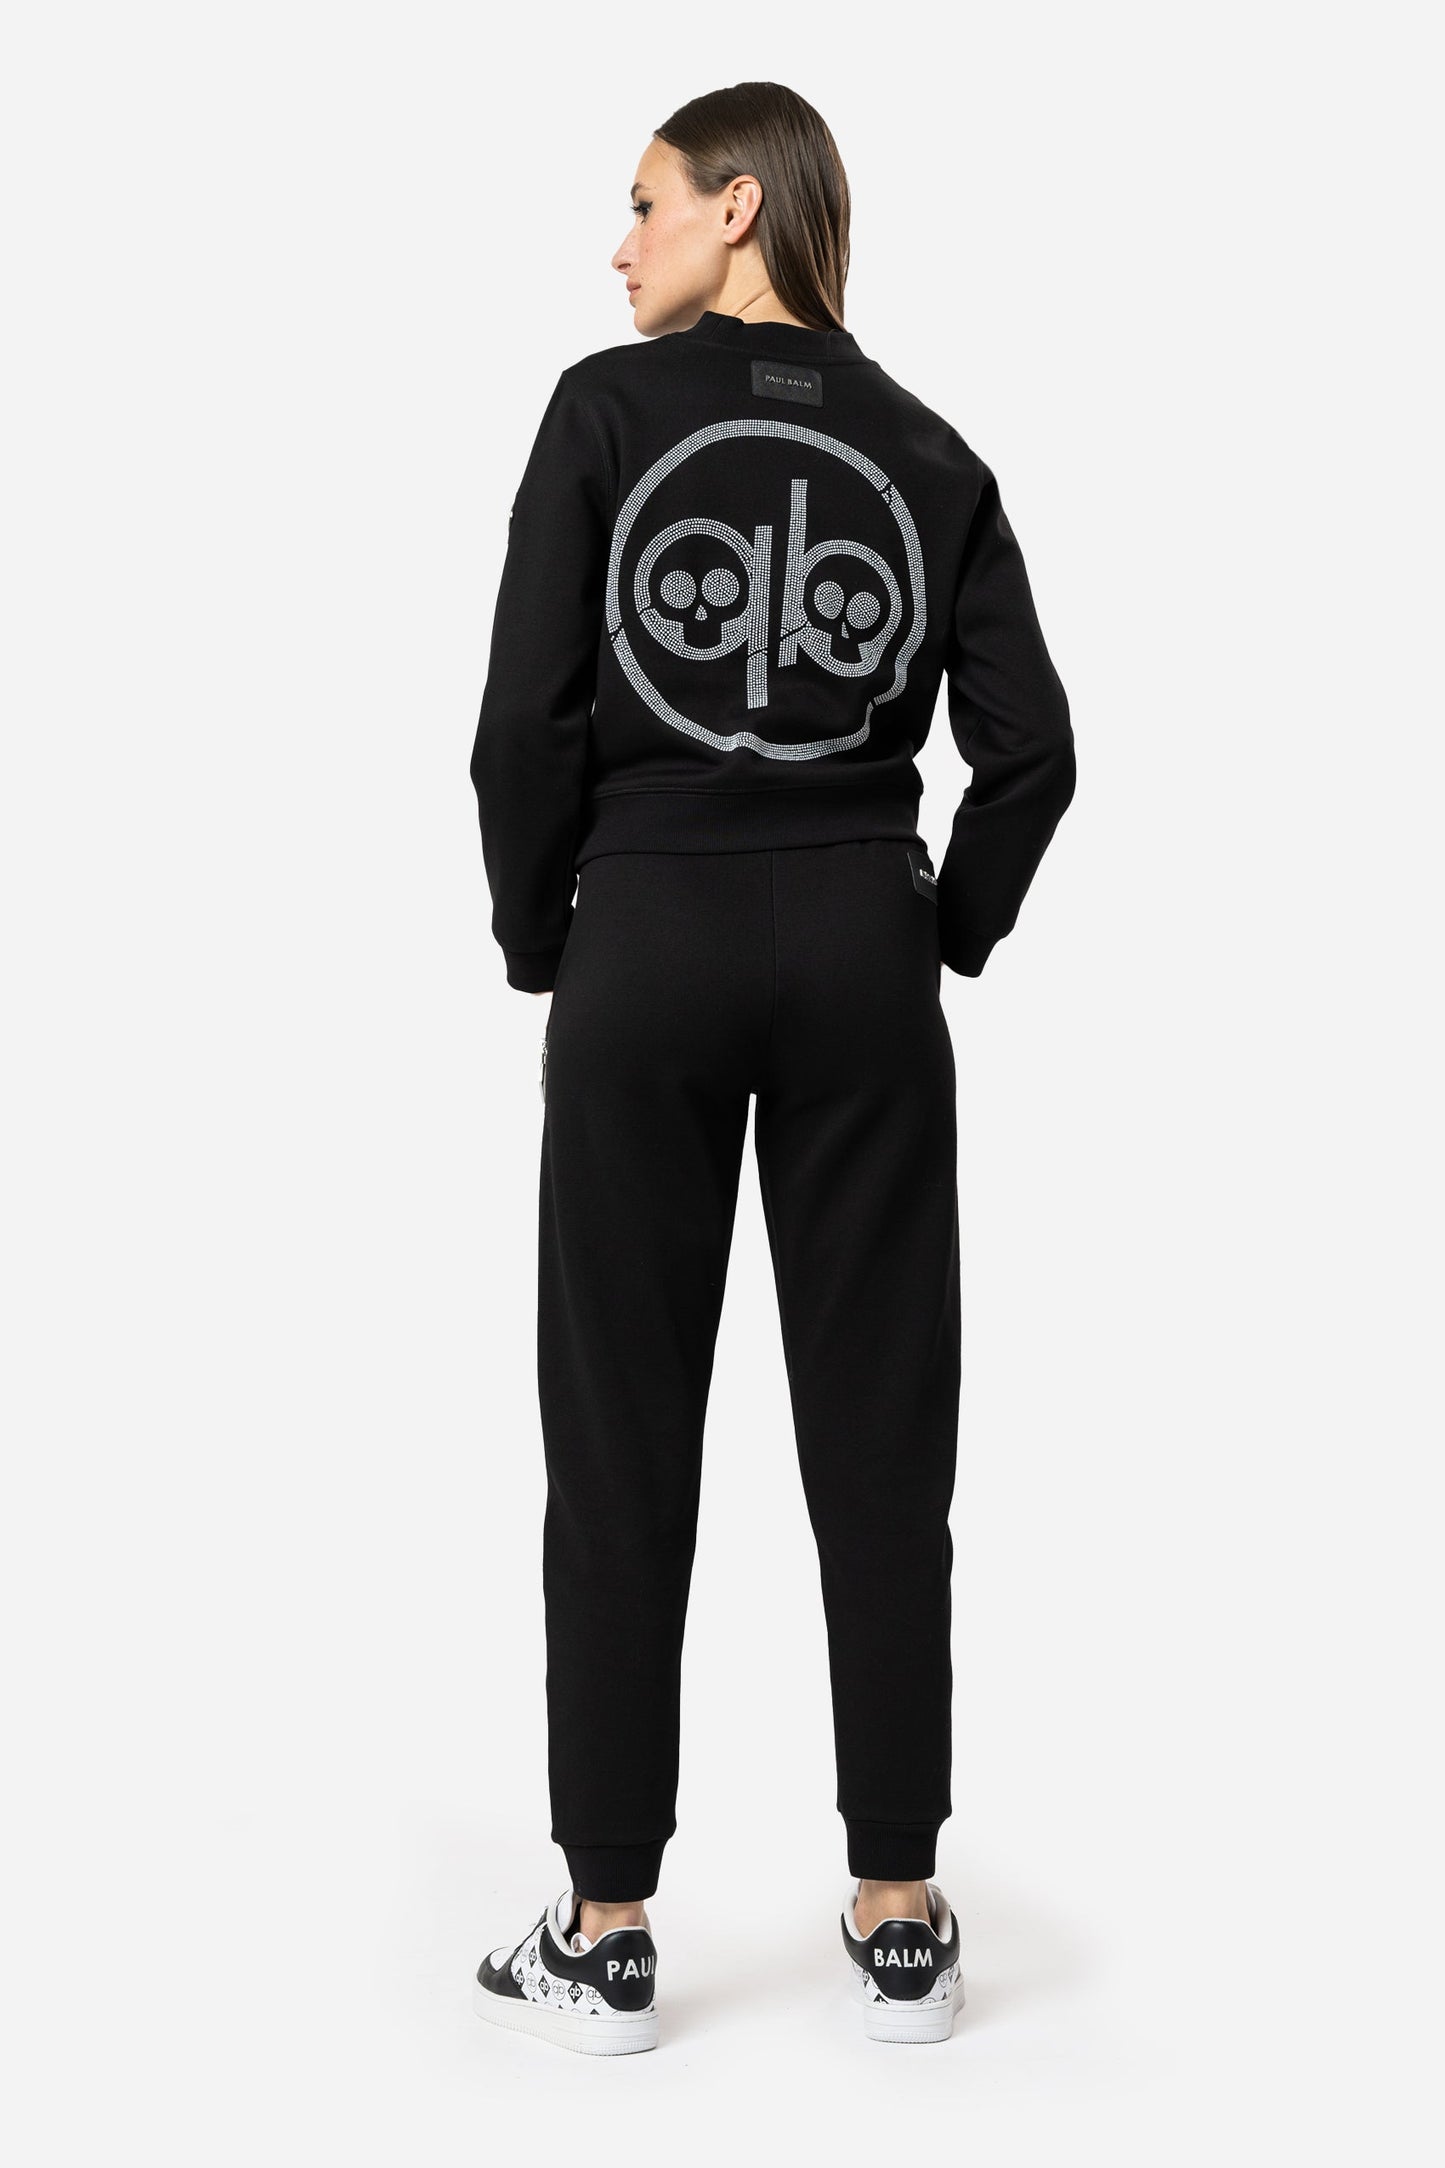 Embroidered Skull Sweatshirt - Limited to 300 - PAUL BALM WORLD